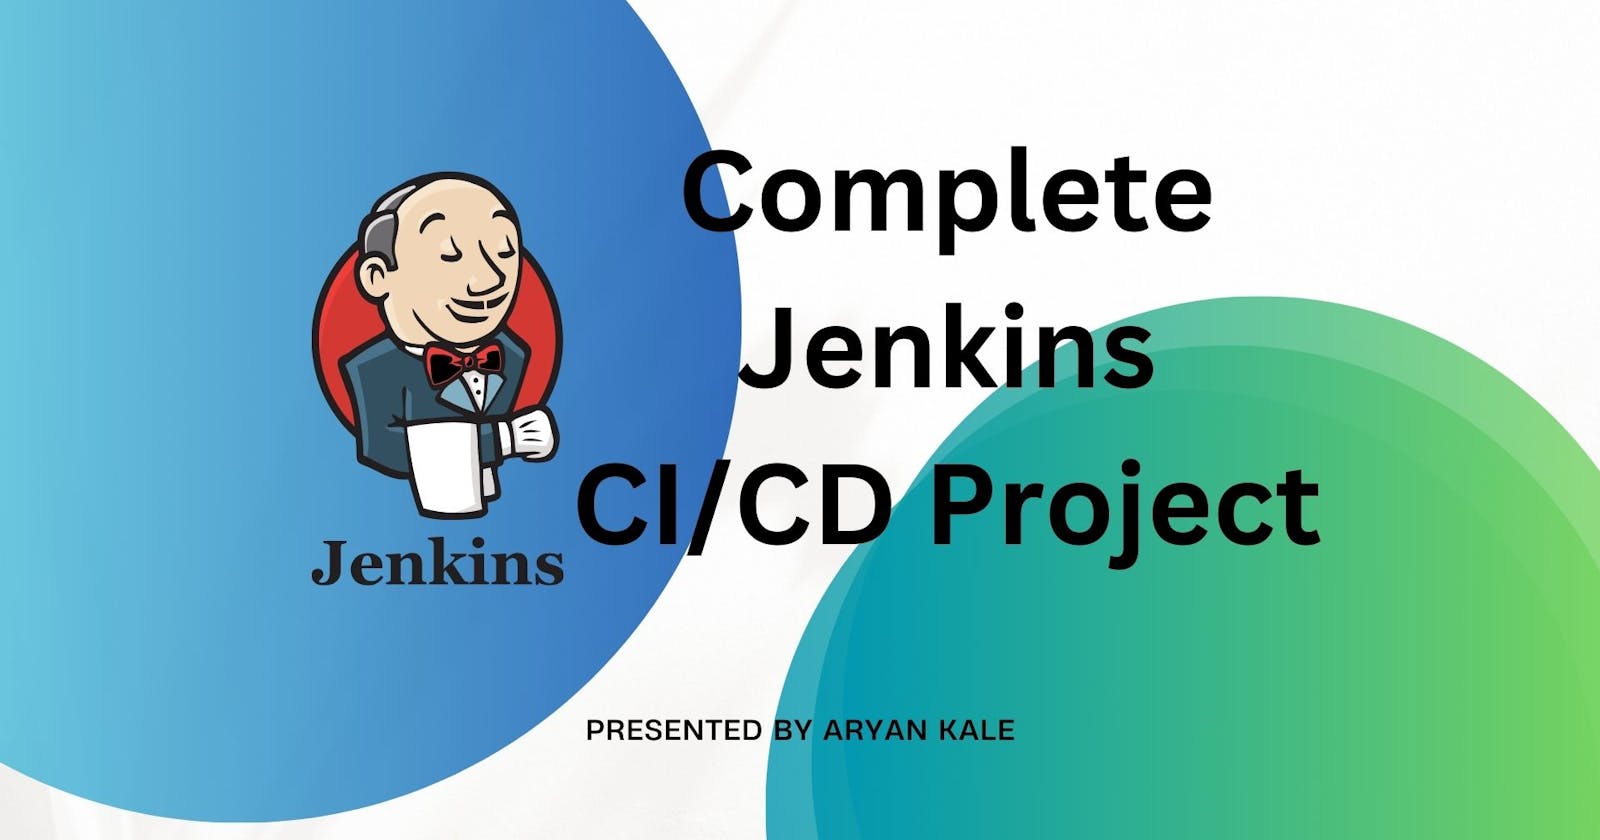 Complete Jenkins CI/CD Project